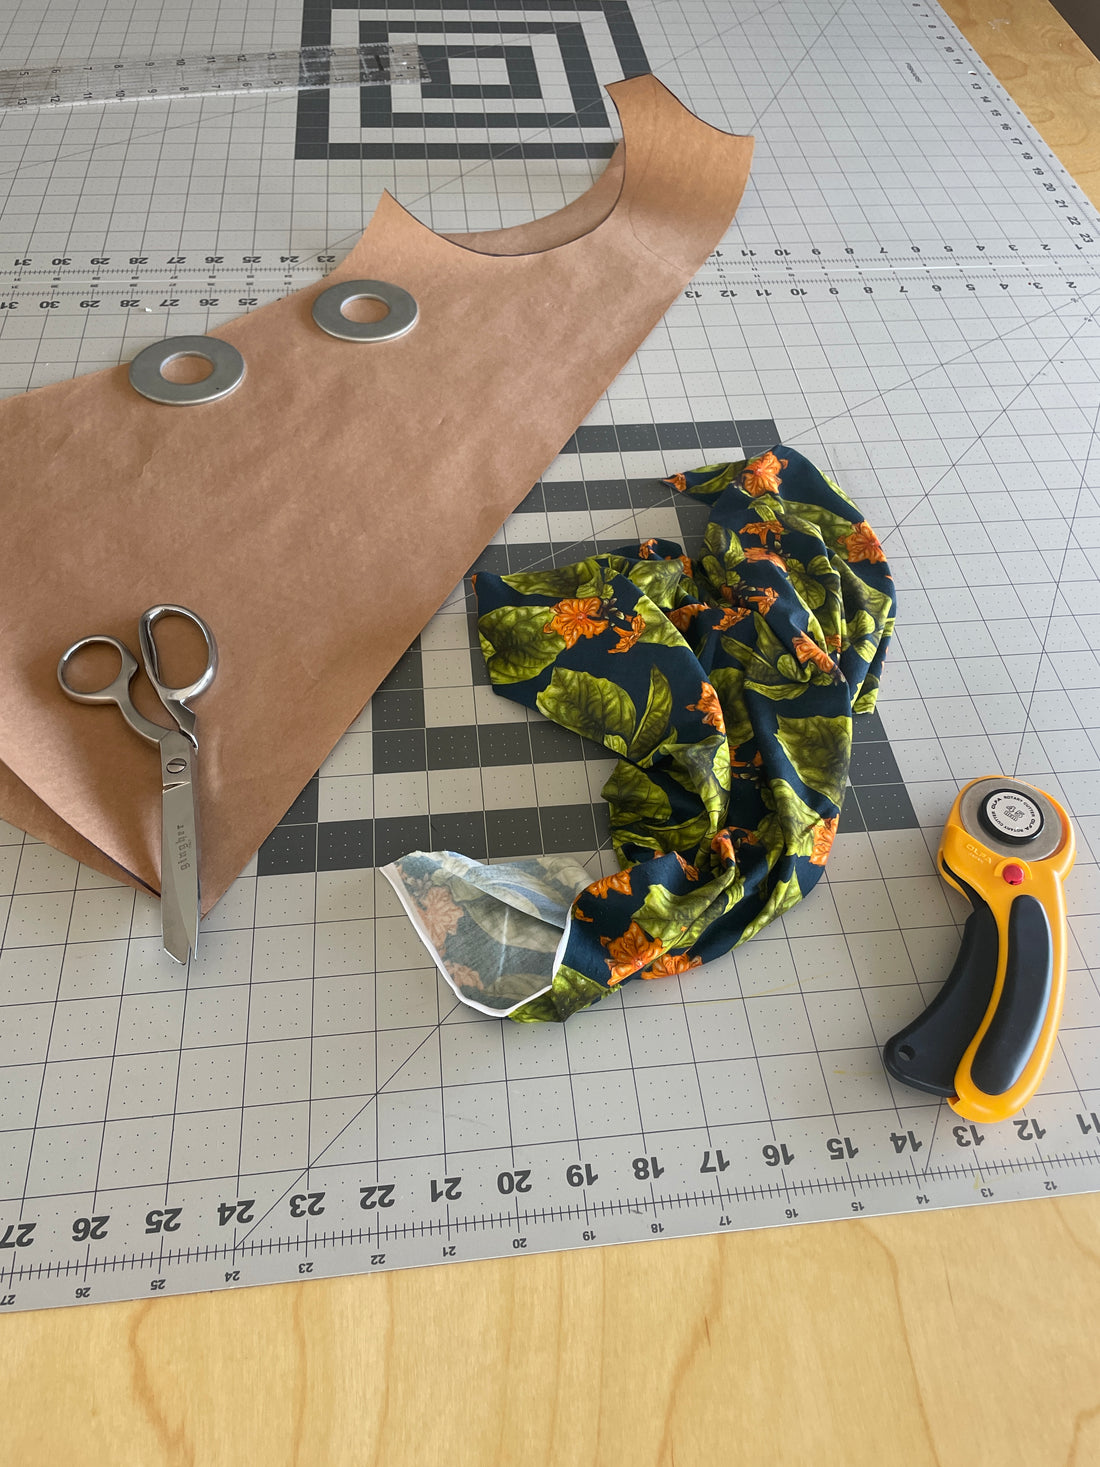 Making time for self-care (and sewing!)